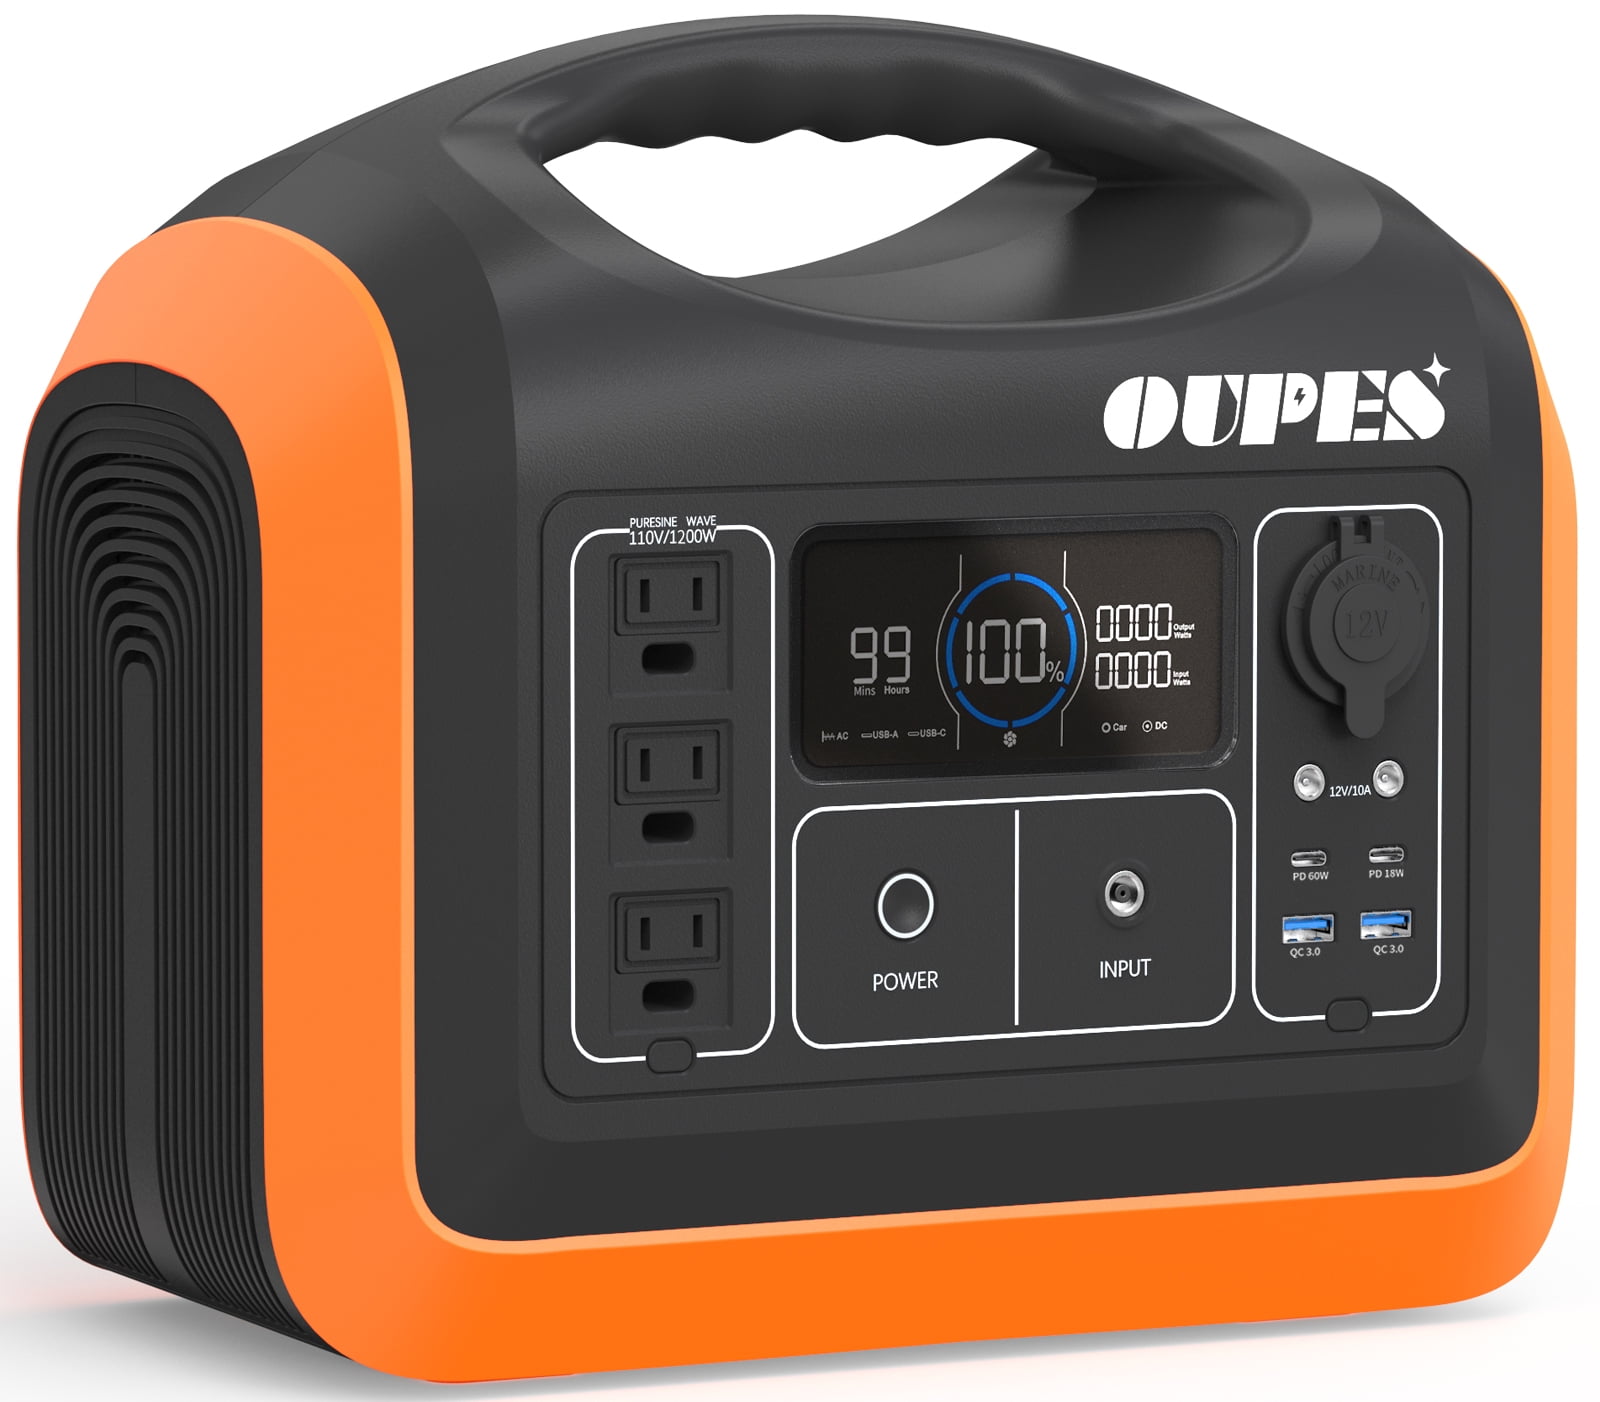 Oupes 1800w Portable Power Station